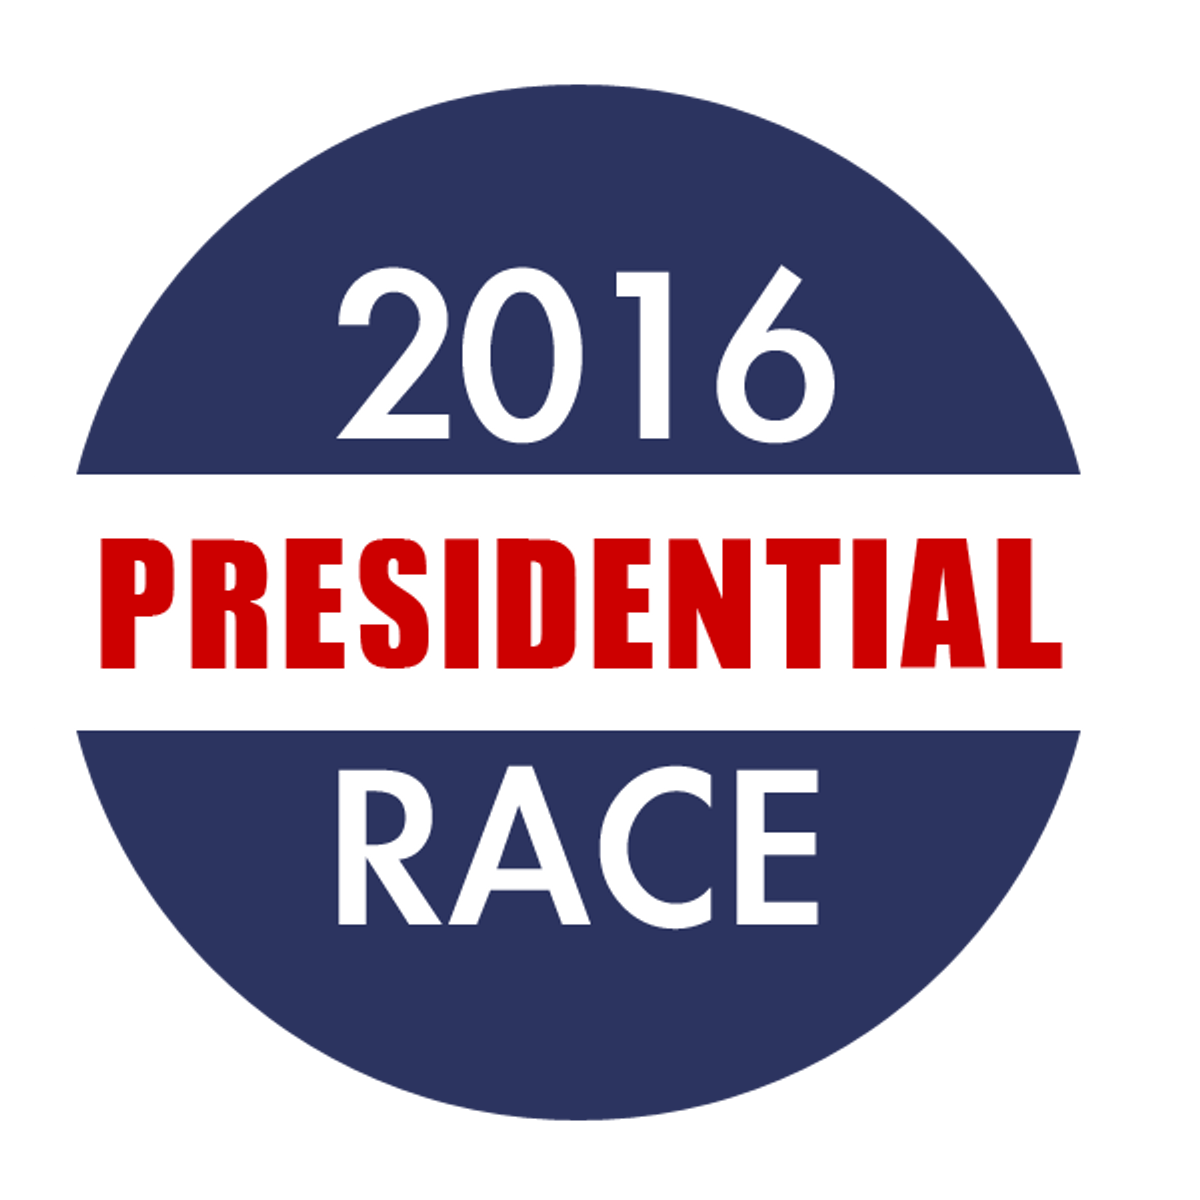 A First Time Voter's Views On The 2016 Presidential Race